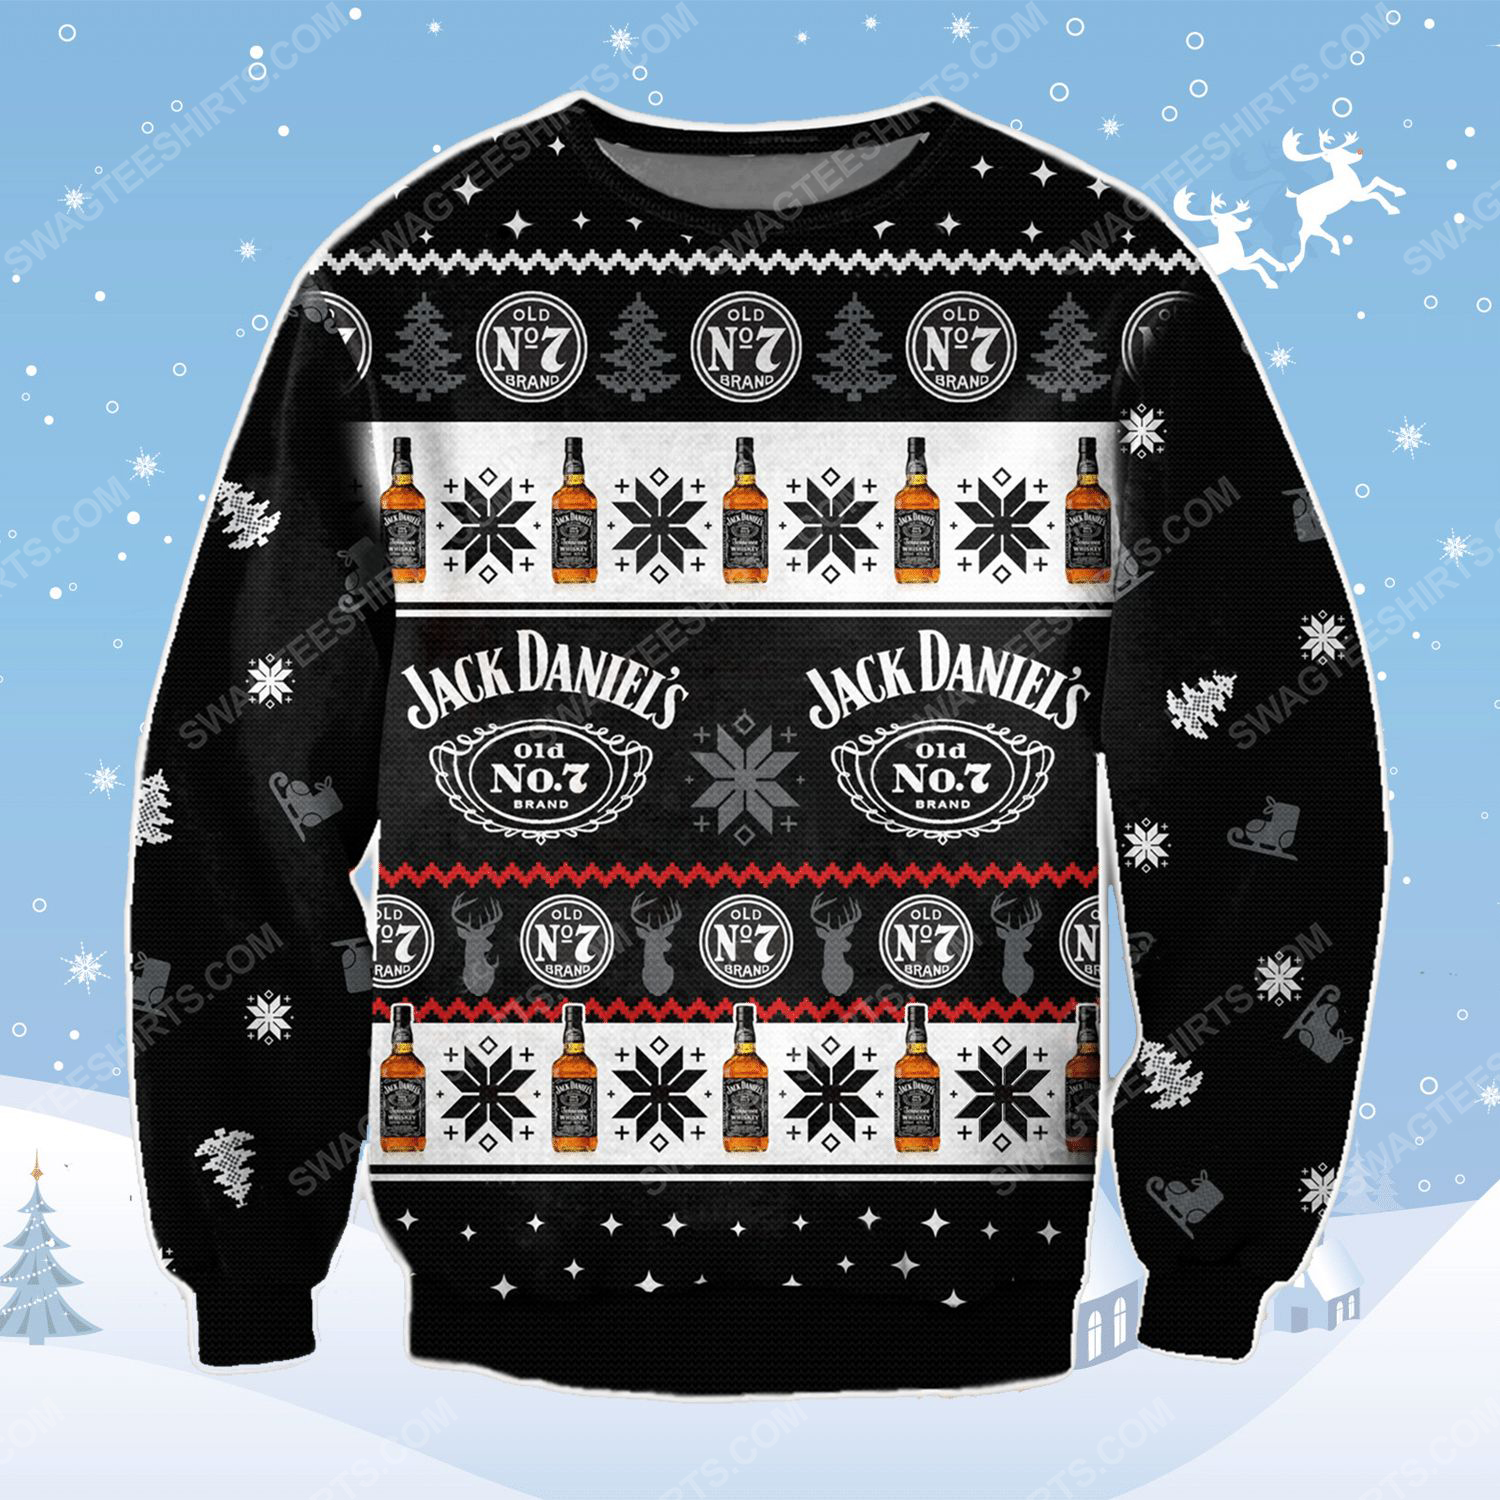 Jack daniel's old no 7 tennessee whiskey ugly christmas sweater - Copy (2)